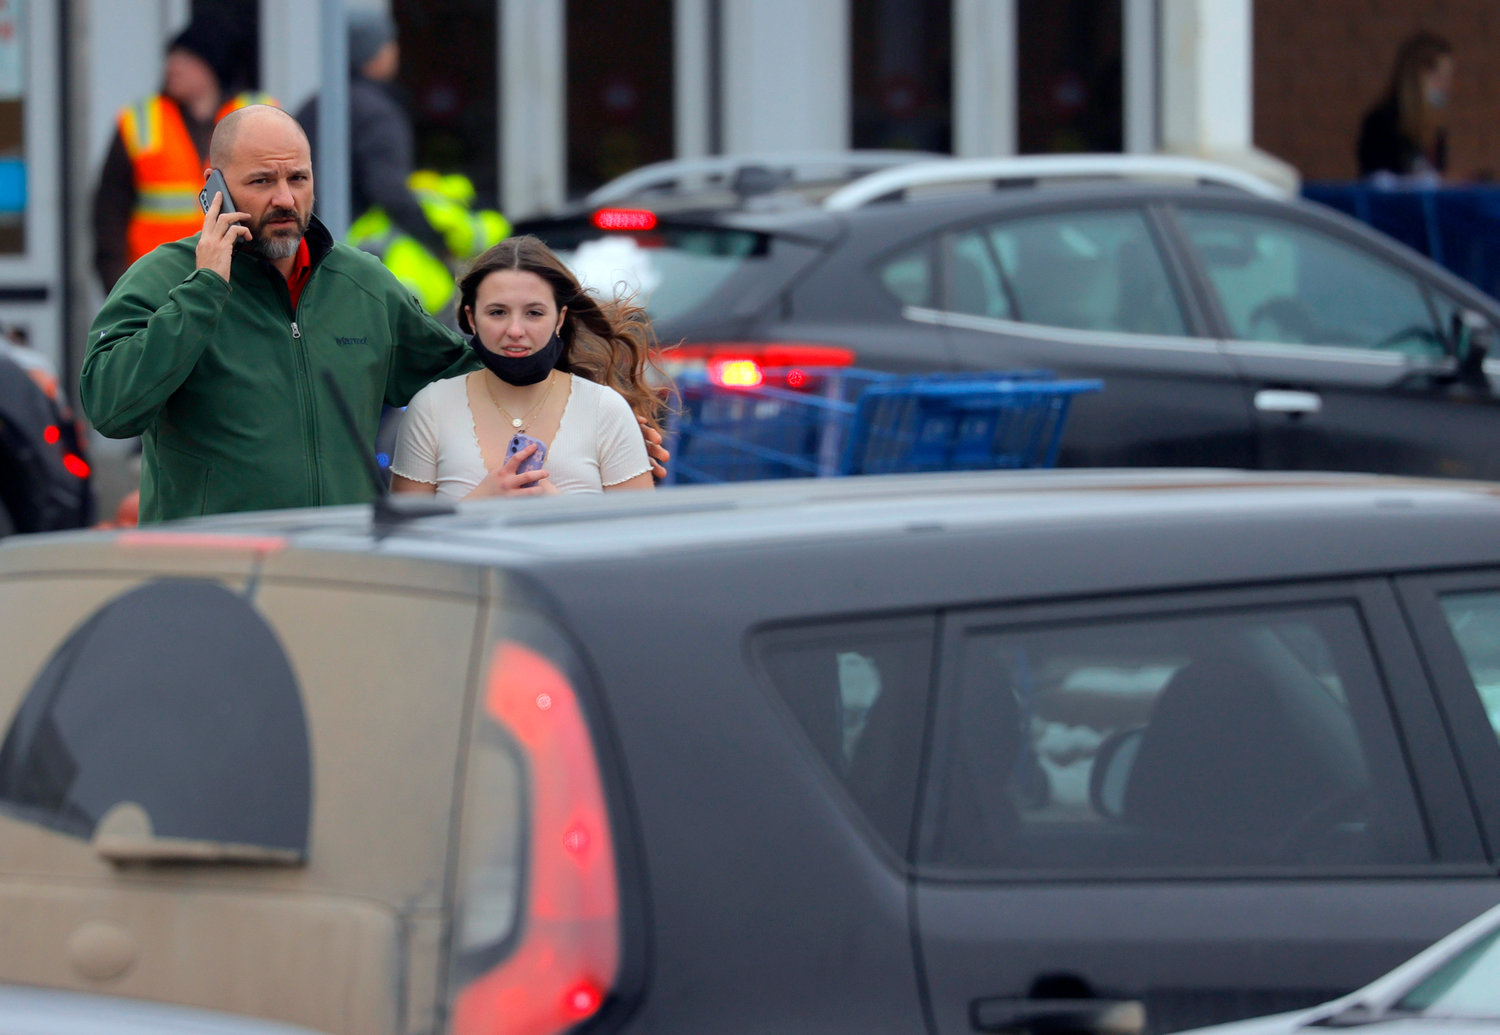 SAFE — A father escorts his daughter after a shooting Tuesday at Oxford High School in Oxford, Mich., north of Detroit.